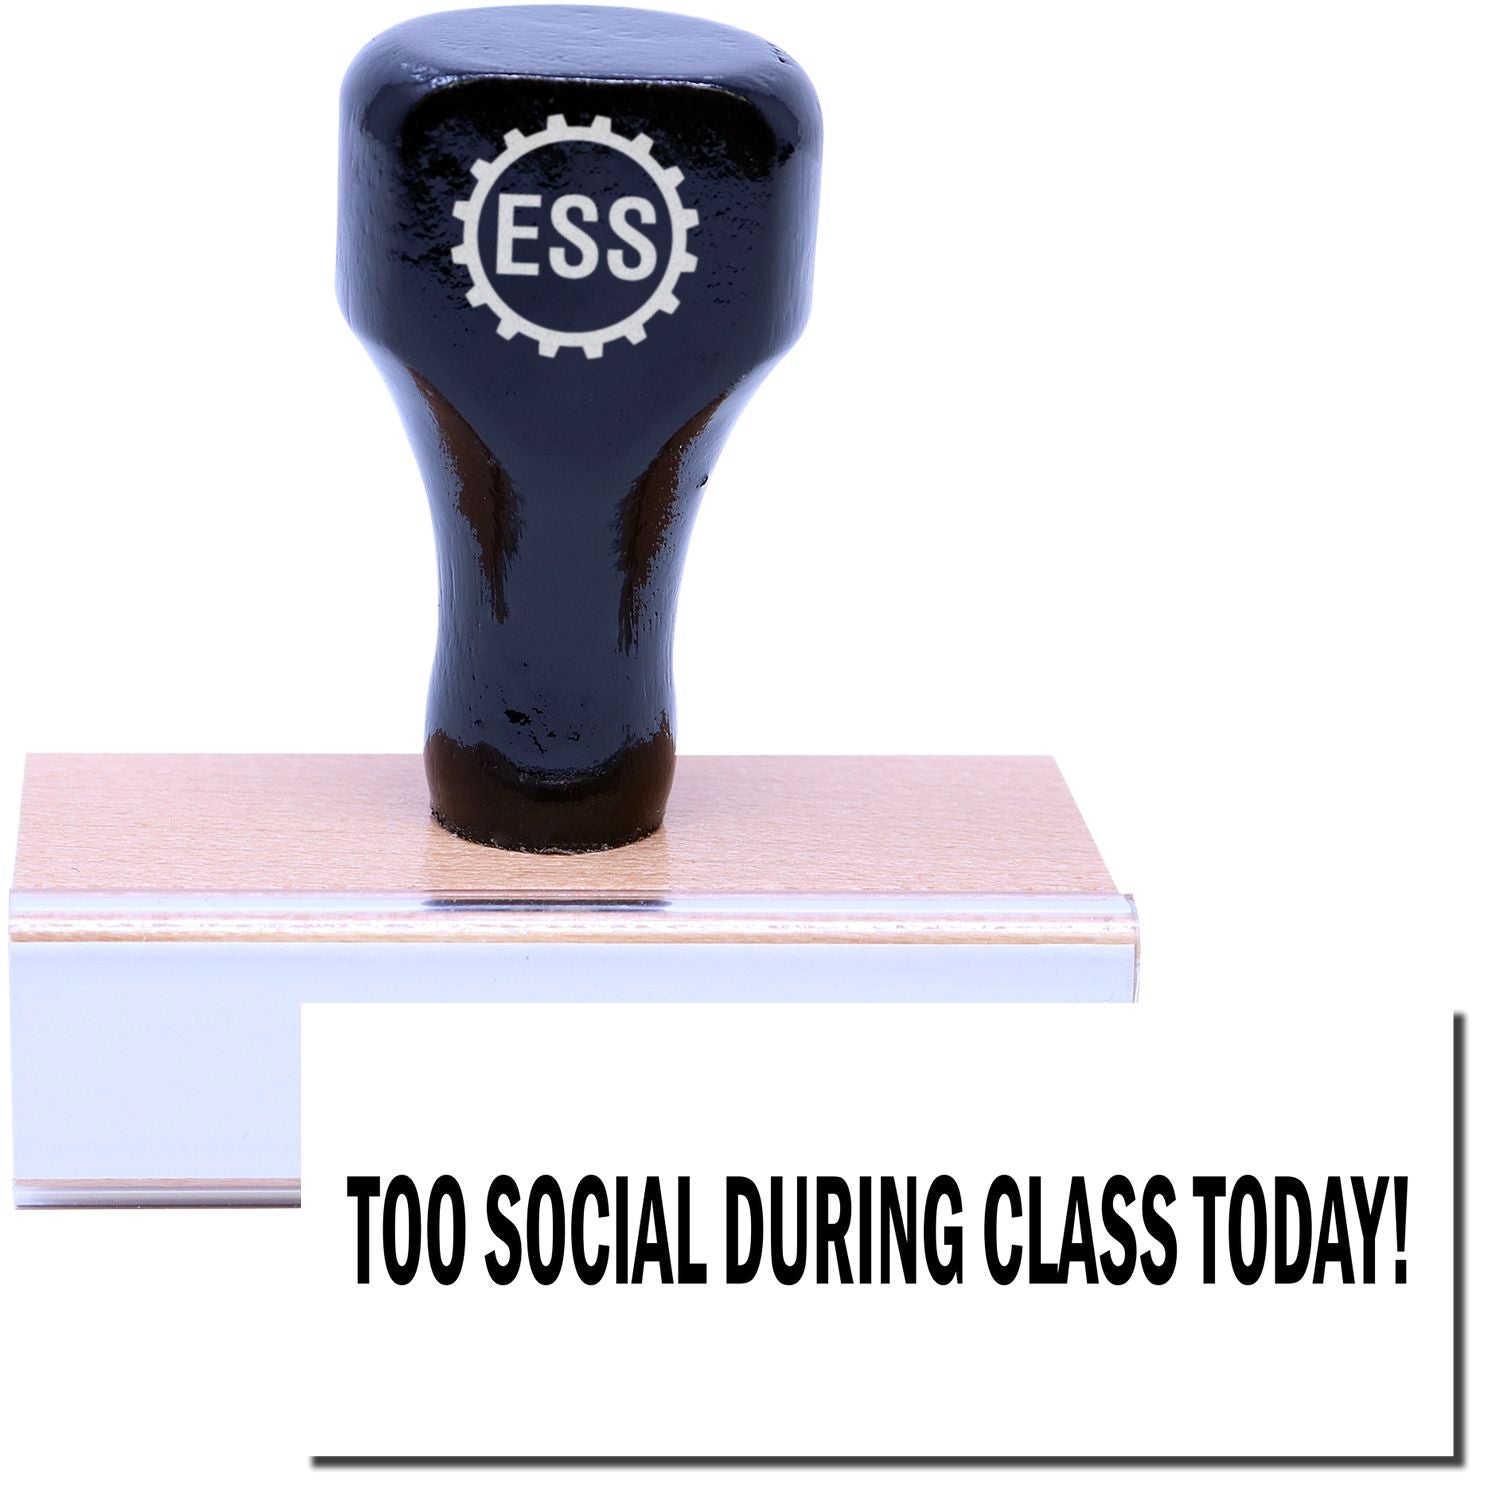 A stock office rubber stamp with a stamped image showing how the text "TOO SOCIAL DURING CLASS TODAY!" in a large font is displayed after stamping.